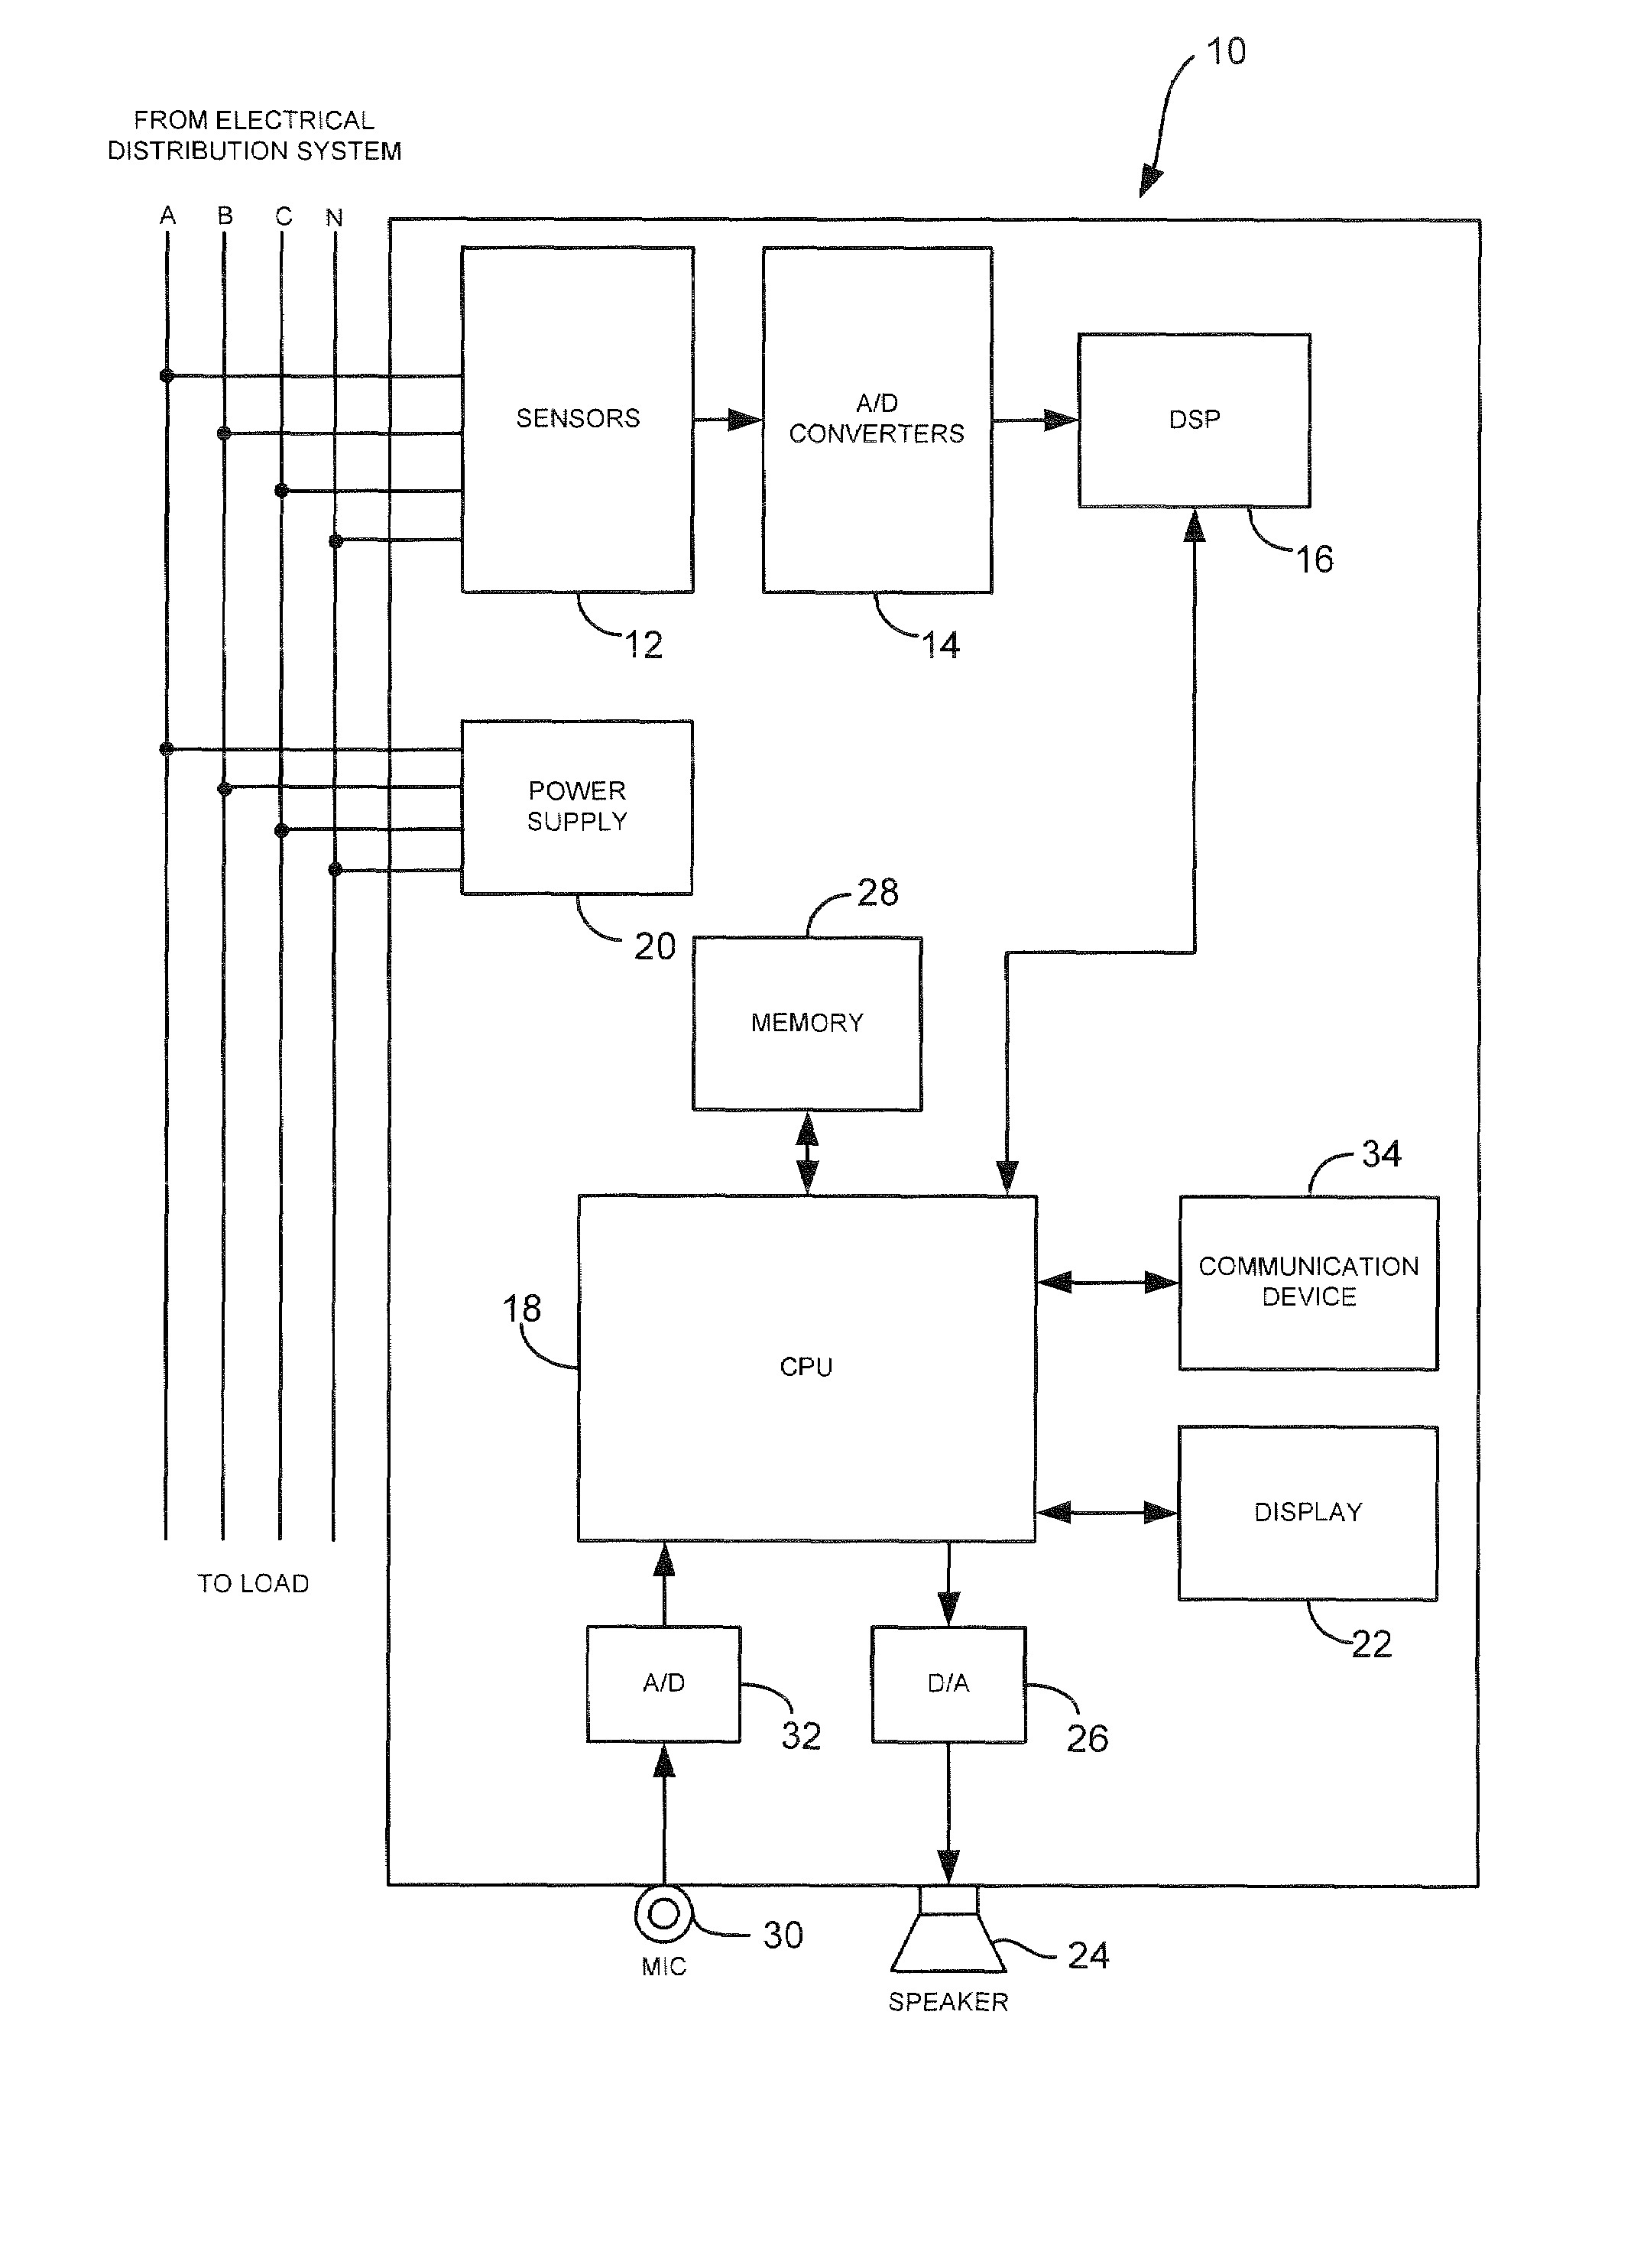 Intelligent electronic device having circuitry for noise reduction for analog-to-digital converters